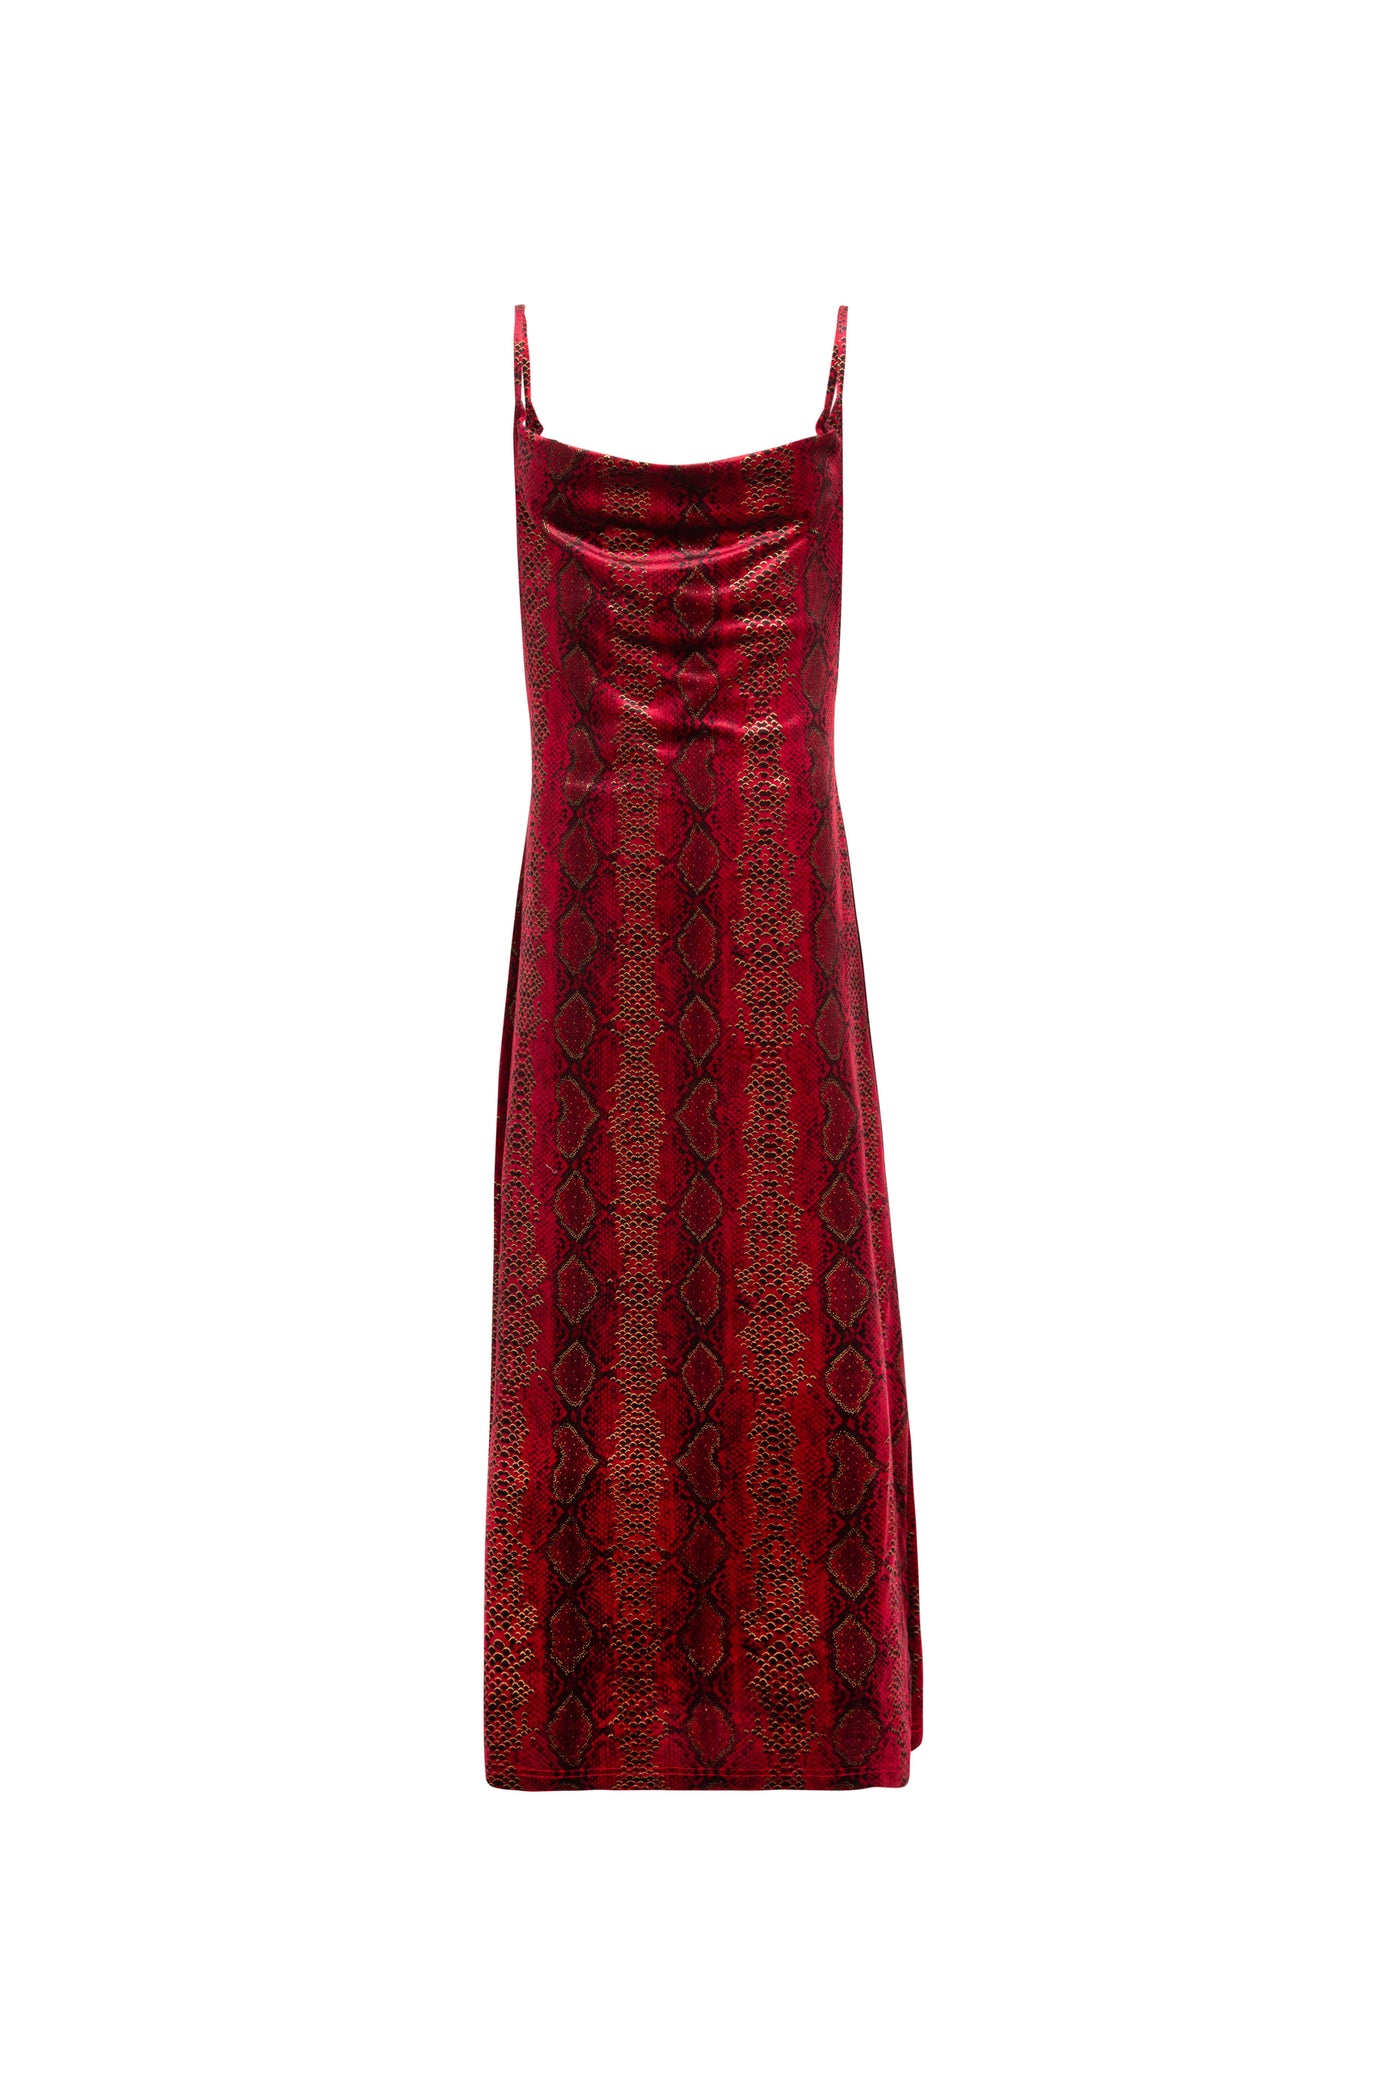 All Night Long Dress - Red - Coop